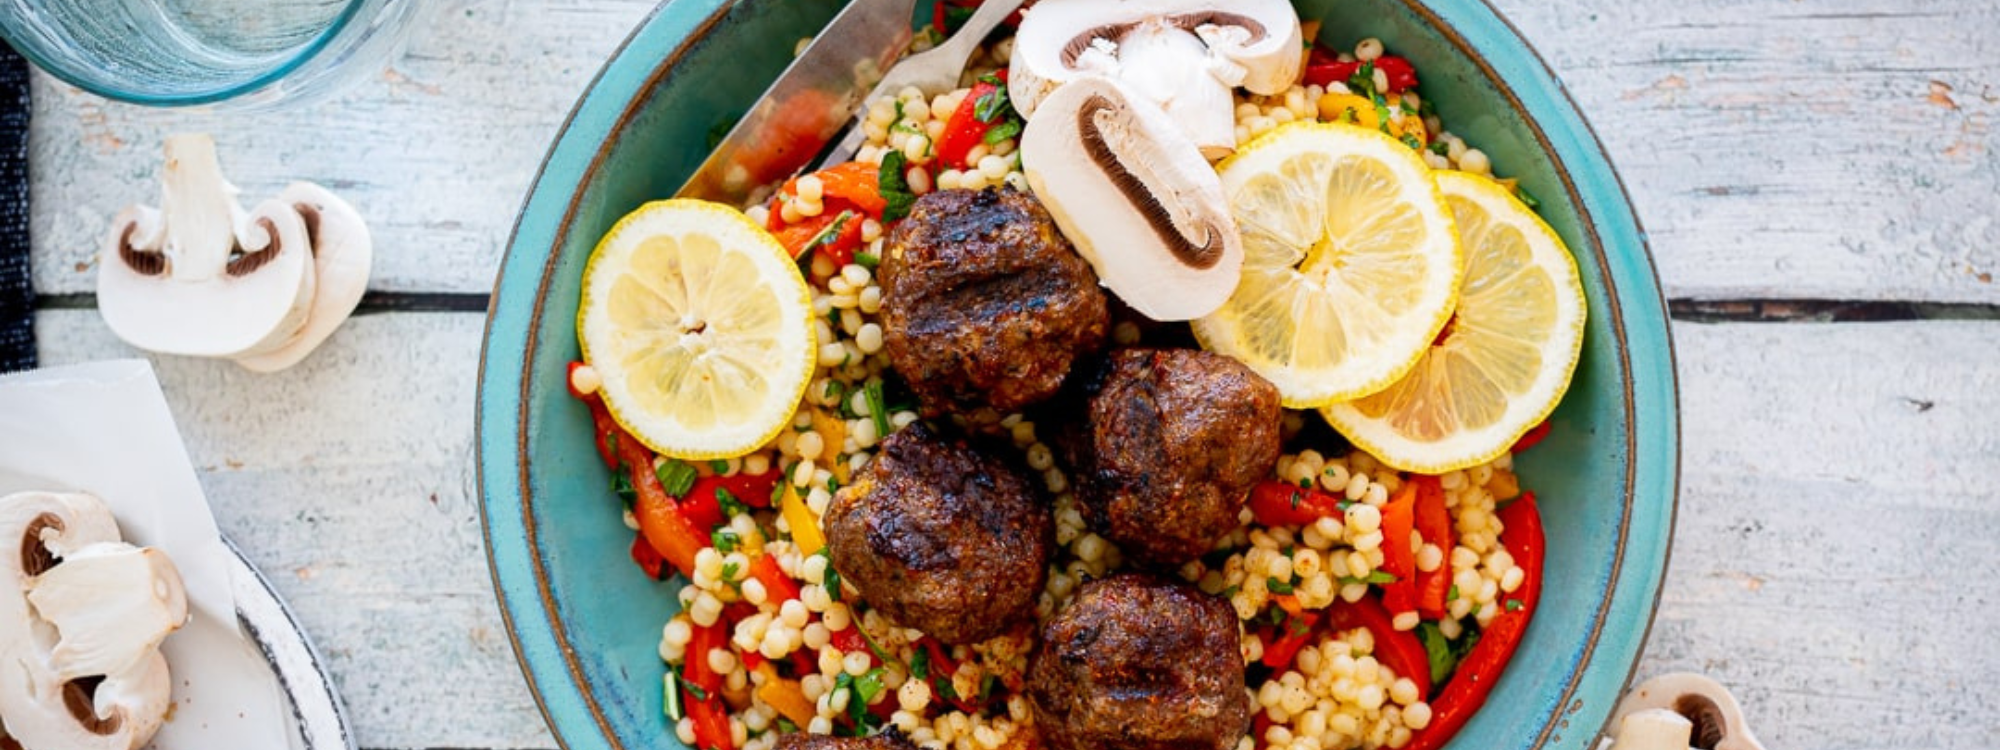 Beef & Mushroom Blended Harissa Meatballs with Roasted Pepper Couscous Salad_summeredition72